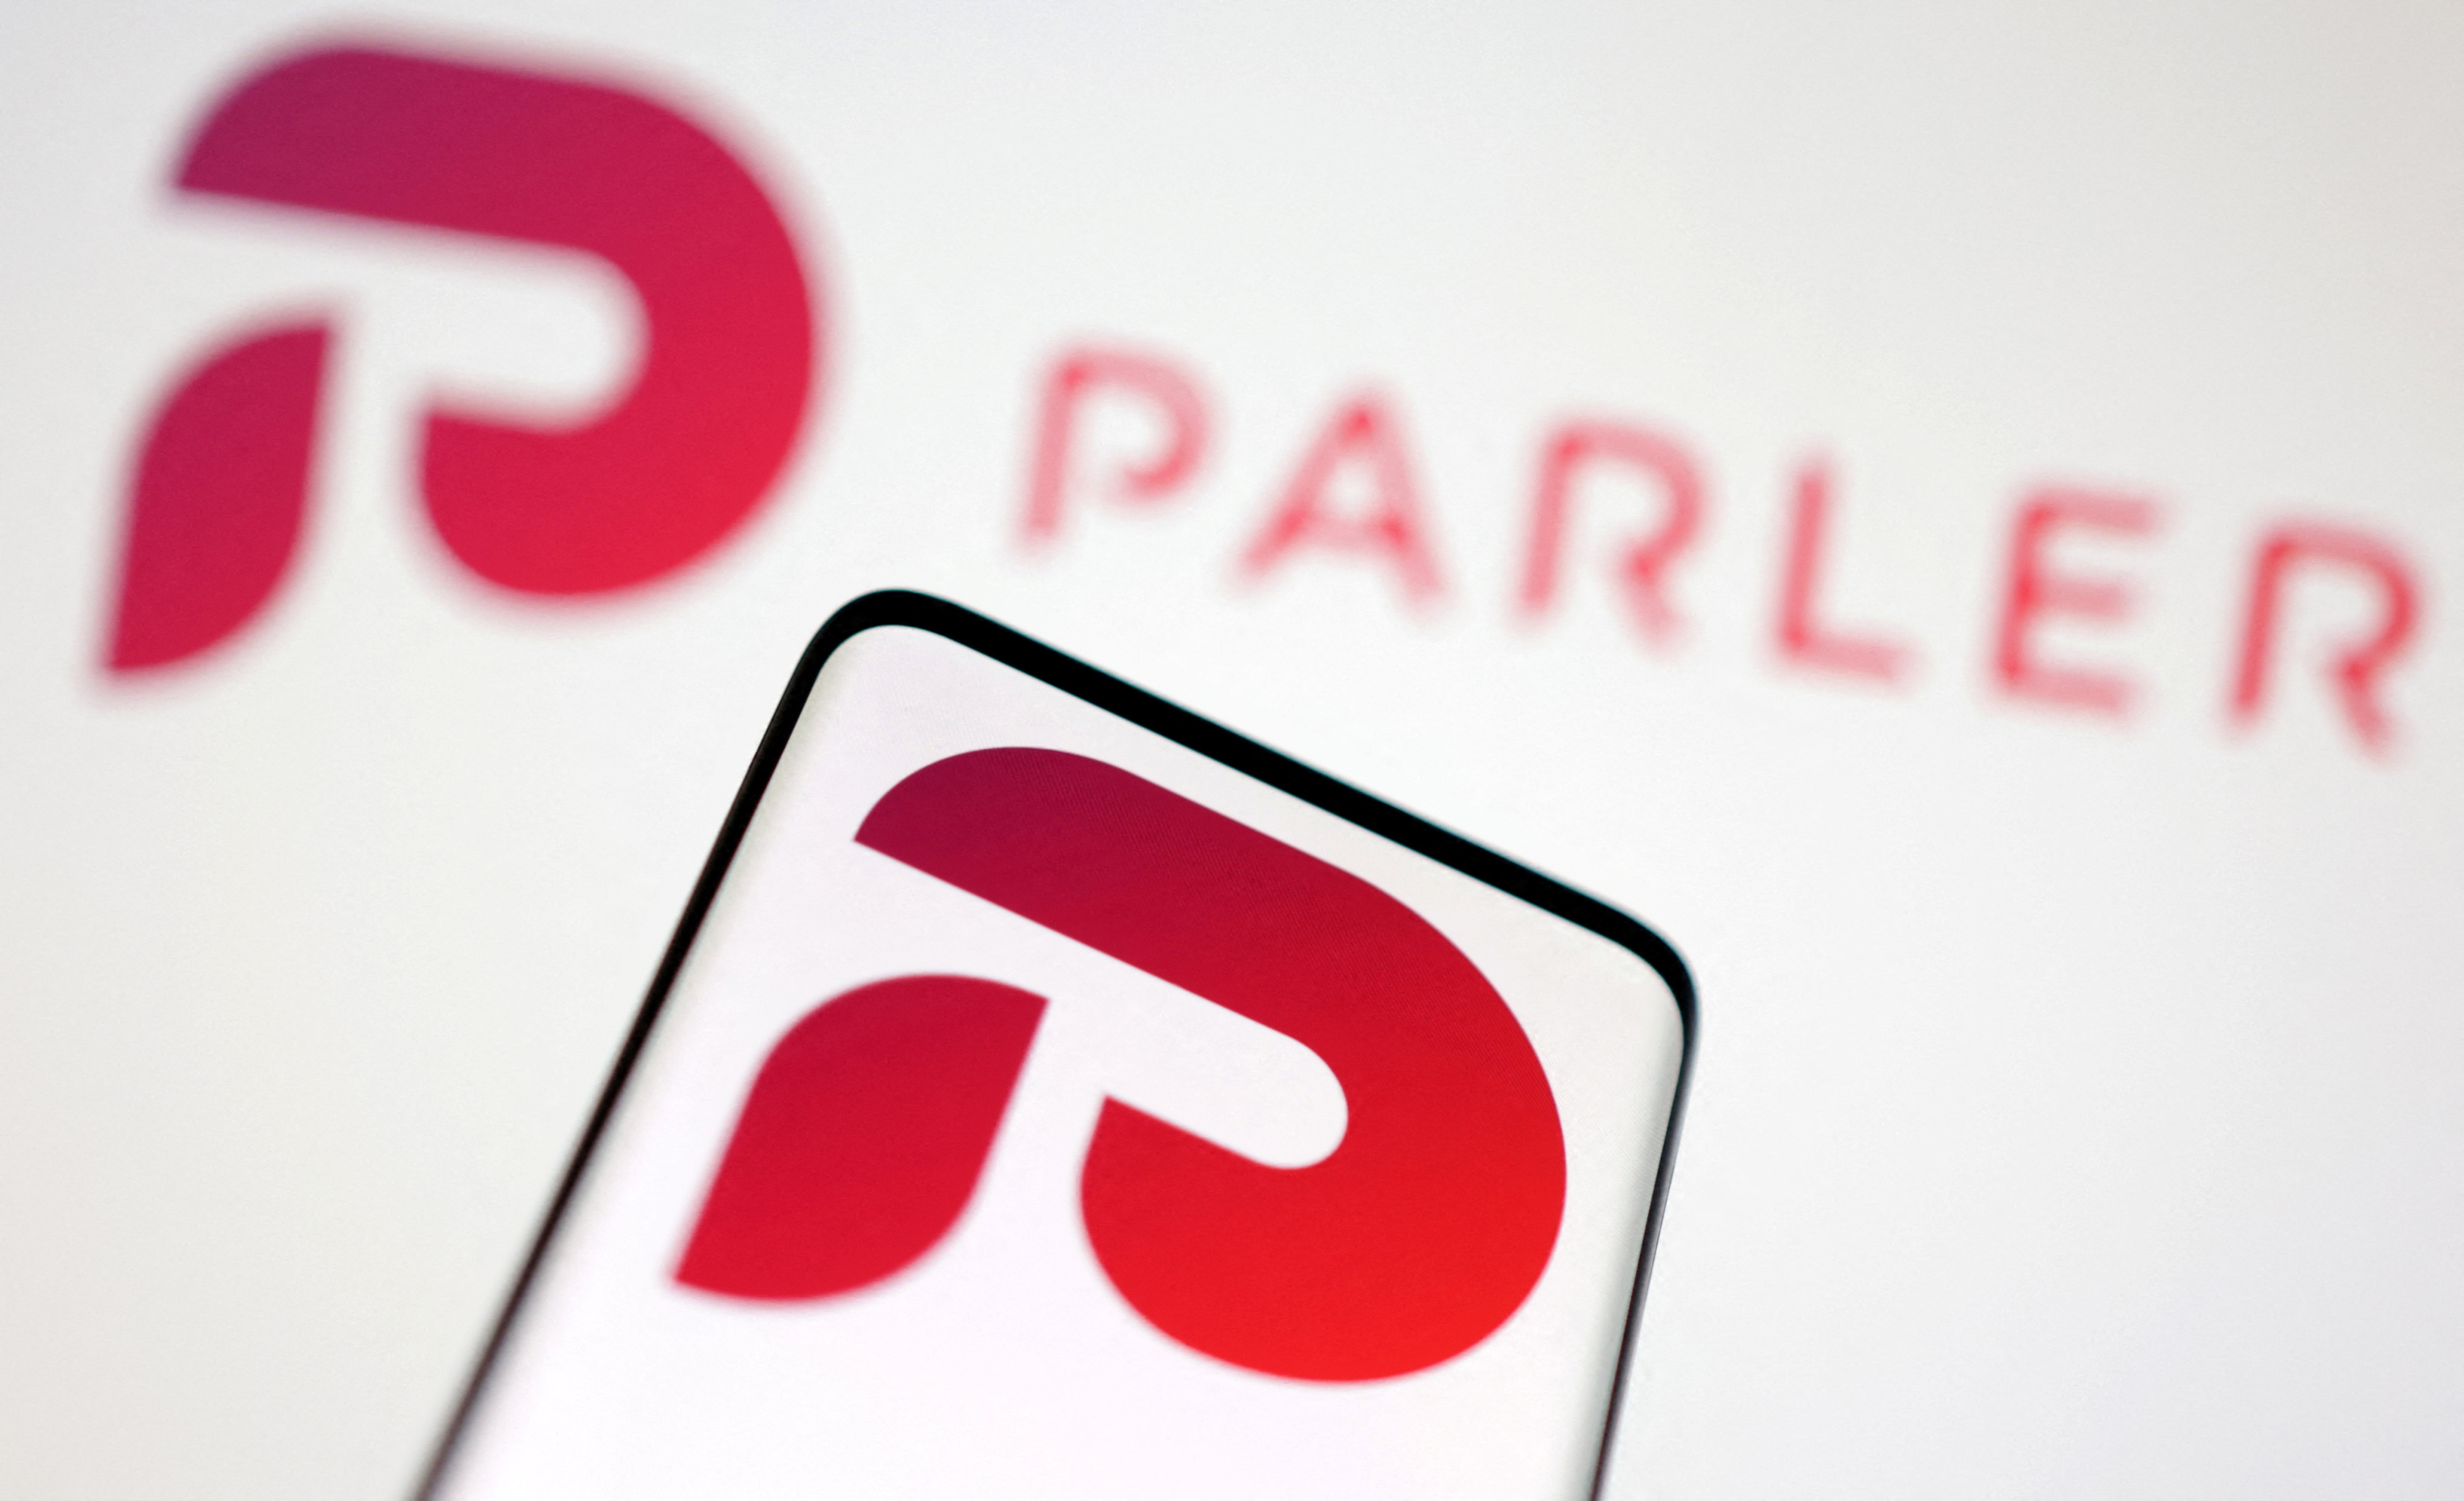 Conglomerate Starboard buys Parler, to shut down social media app temporarily | Reuters